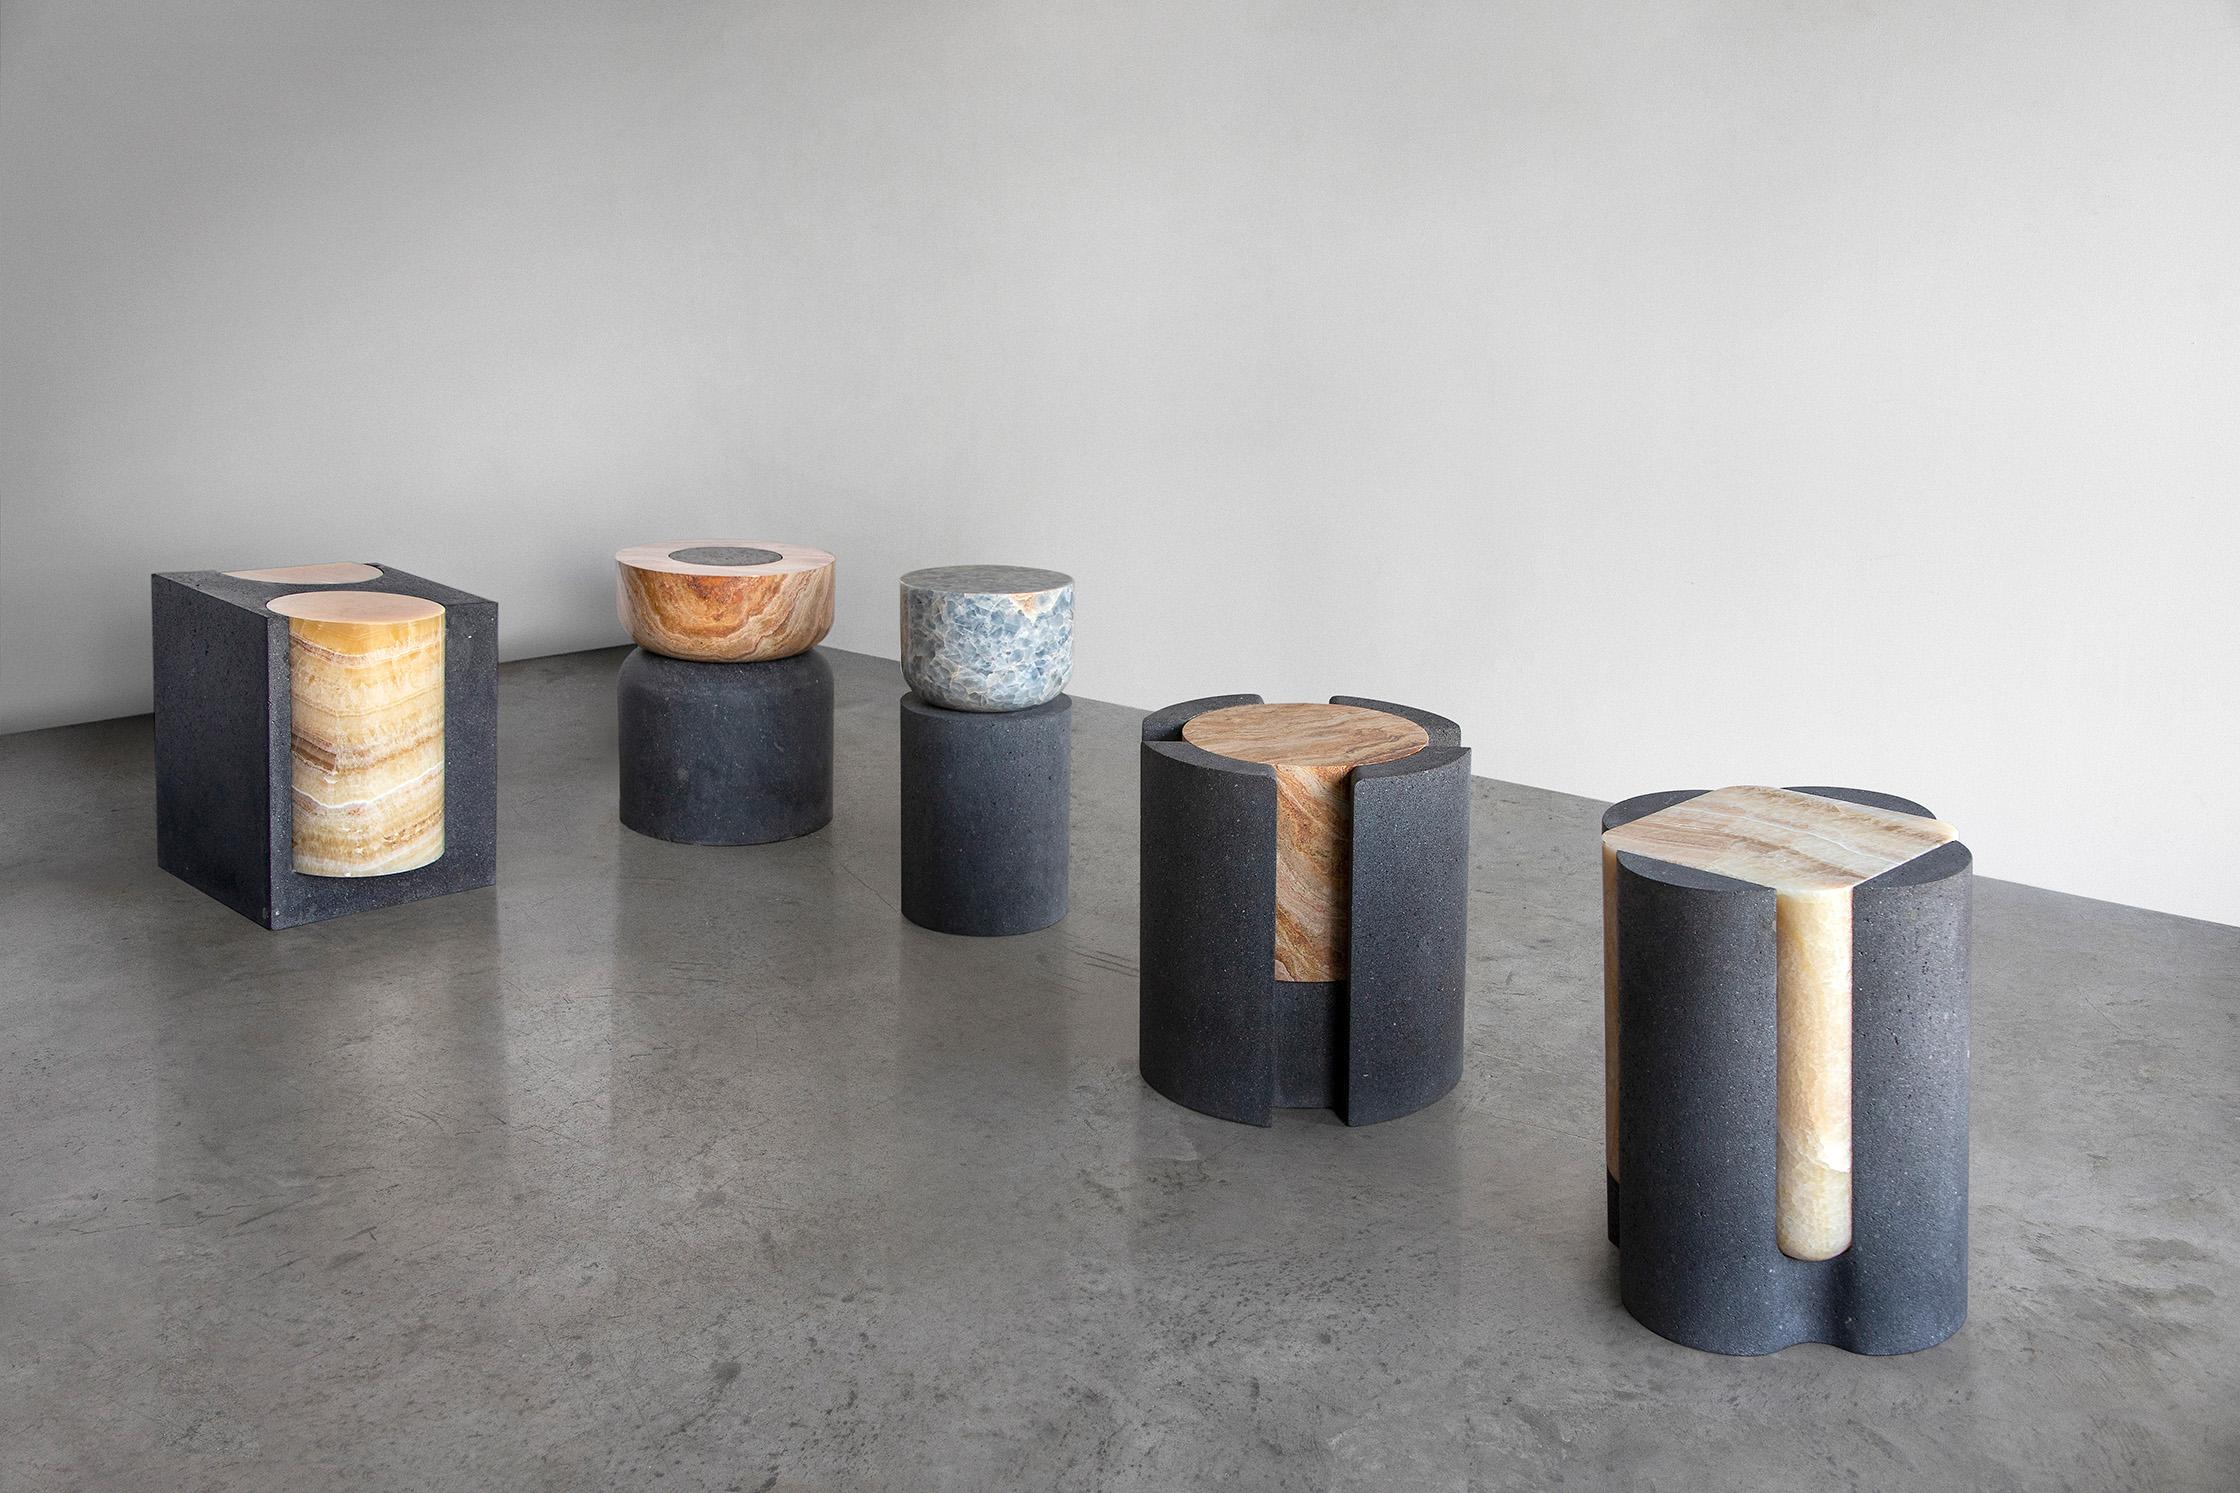 Organic Modern Volcanic Shade V Stool/Table by Sten Studio, Represented by Tuleste Factory For Sale